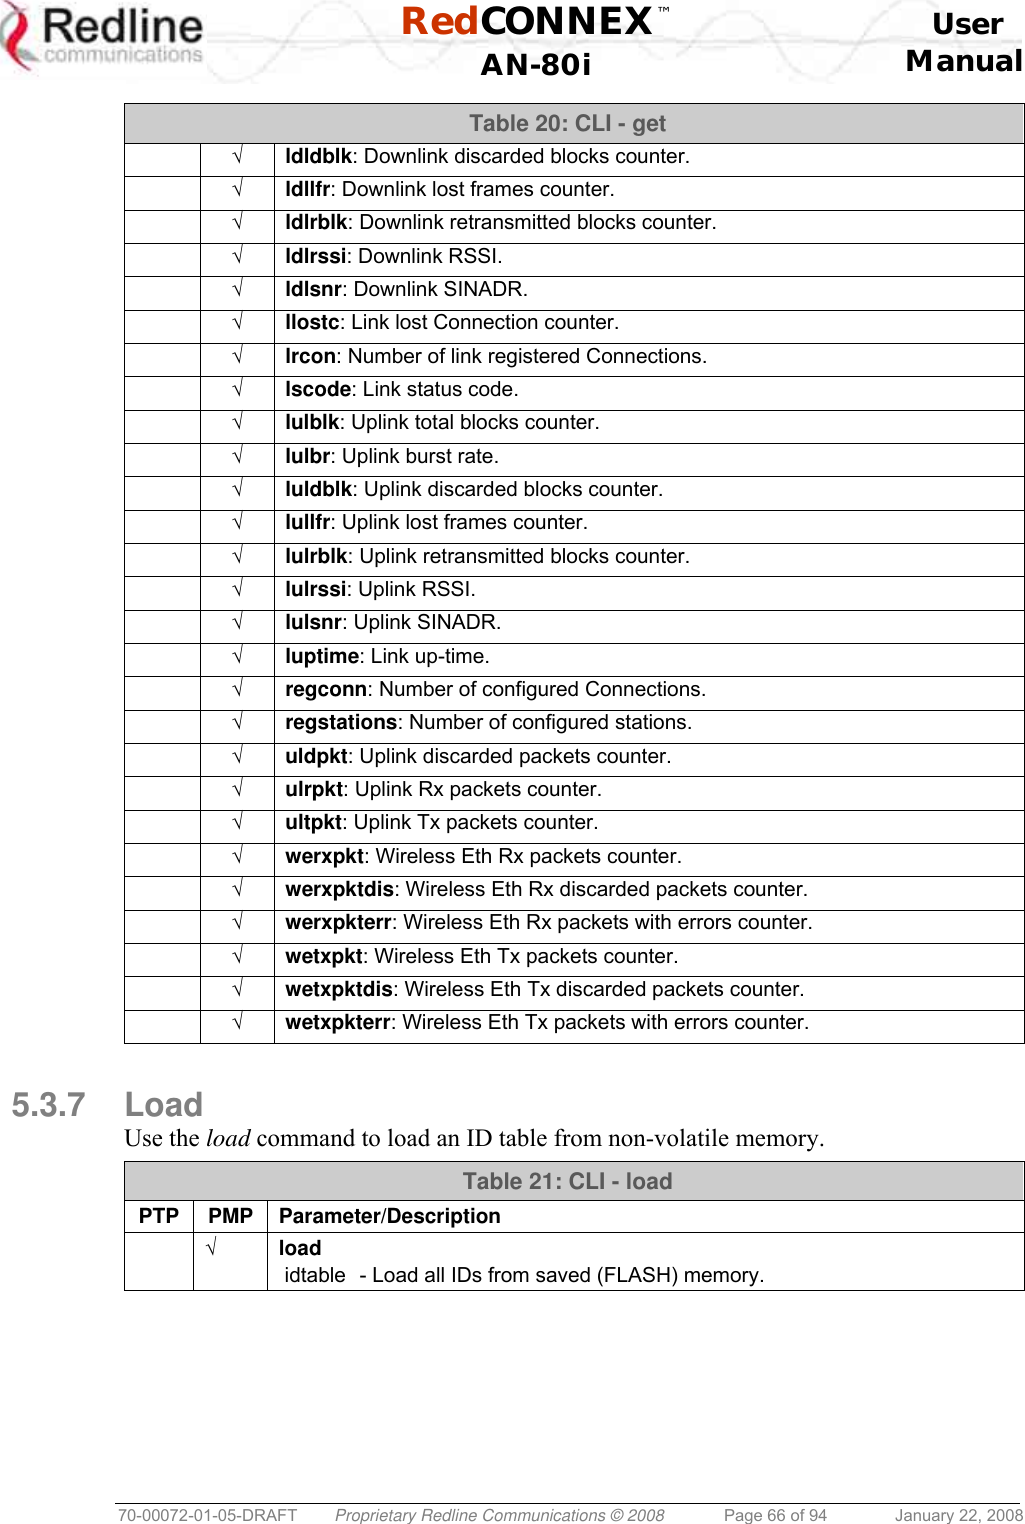  RedCONNEX™    User  AN-80i Manual  70-00072-01-05-DRAFT  Proprietary Redline Communications © 2008  Page 66 of 94  January 22, 2008 Table 20: CLI - get  √ ldldblk: Downlink discarded blocks counter.  √ ldllfr: Downlink lost frames counter.  √ ldlrblk: Downlink retransmitted blocks counter.  √ ldlrssi: Downlink RSSI.  √ ldlsnr: Downlink SINADR.  √ llostc: Link lost Connection counter.  √ lrcon: Number of link registered Connections.  √ lscode: Link status code.  √ lulblk: Uplink total blocks counter.  √ lulbr: Uplink burst rate.  √ luldblk: Uplink discarded blocks counter.  √ lullfr: Uplink lost frames counter.  √ lulrblk: Uplink retransmitted blocks counter.  √ lulrssi: Uplink RSSI.  √ lulsnr: Uplink SINADR.  √ luptime: Link up-time.  √ regconn: Number of configured Connections.  √ regstations: Number of configured stations.  √ uldpkt: Uplink discarded packets counter.  √ ulrpkt: Uplink Rx packets counter.  √ ultpkt: Uplink Tx packets counter.  √ werxpkt: Wireless Eth Rx packets counter.  √ werxpktdis: Wireless Eth Rx discarded packets counter.  √ werxpkterr: Wireless Eth Rx packets with errors counter.  √ wetxpkt: Wireless Eth Tx packets counter.  √ wetxpktdis: Wireless Eth Tx discarded packets counter.  √ wetxpkterr: Wireless Eth Tx packets with errors counter.  5.3.7 Load Use the load command to load an ID table from non-volatile memory. Table 21: CLI - load PTP PMP Parameter/Description  √ load  idtable  - Load all IDs from saved (FLASH) memory.  